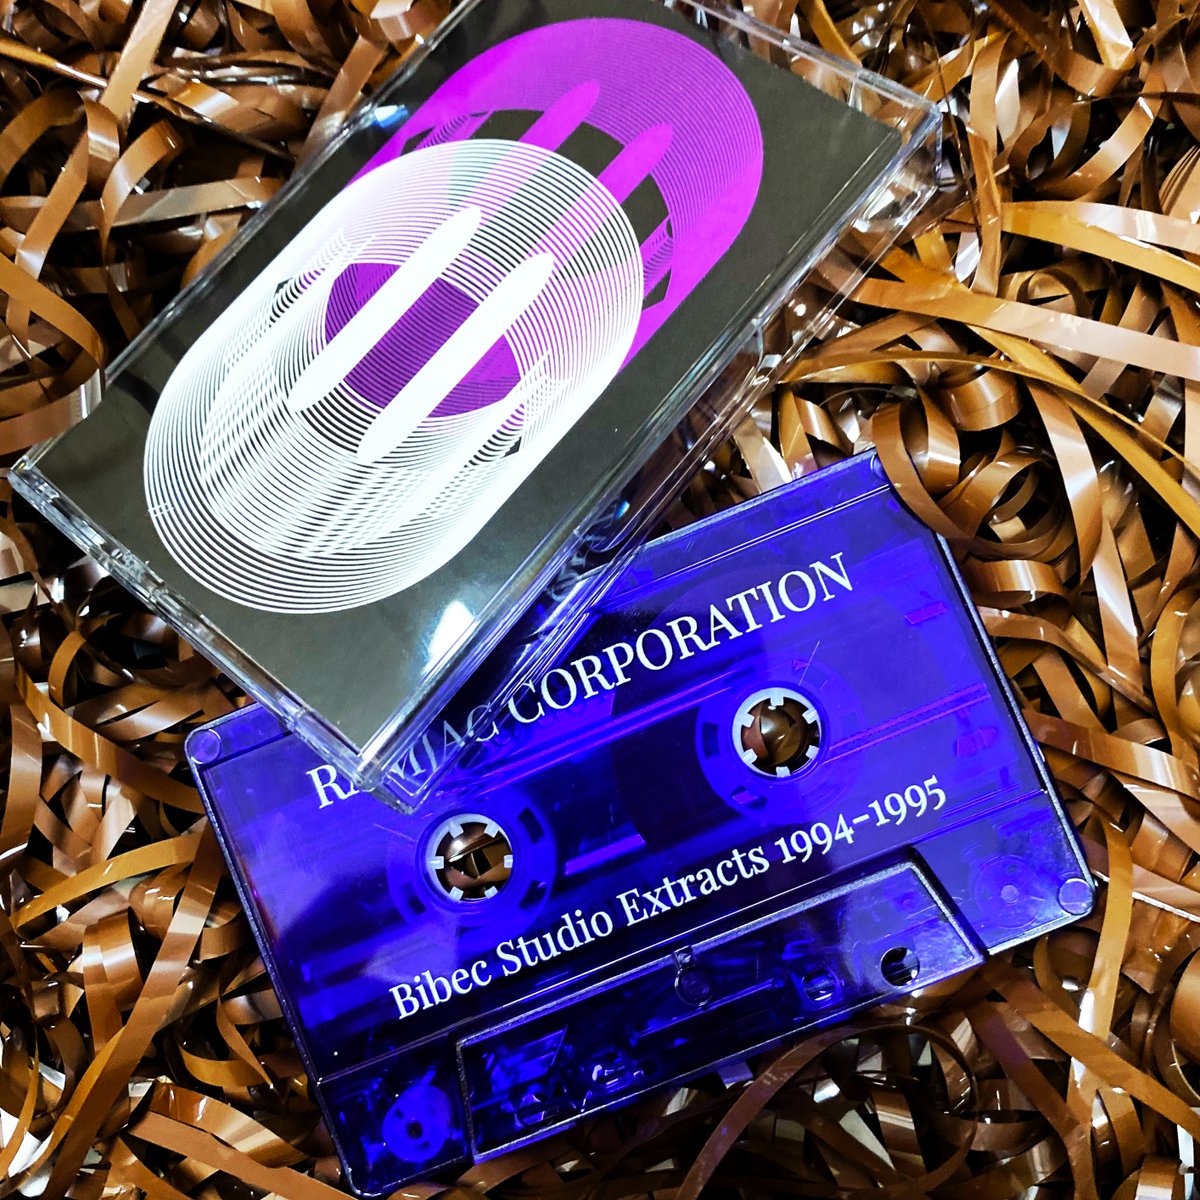 Ramjac Corporation - Bibec Studio Extracts 1994 - 1995 // Limited edition cassette drops this Saturday (4th May). Pick up a copy in person at Ramjac's in-store event at Inverted Audio Record Store. inverted-audio.store/products/ramja…